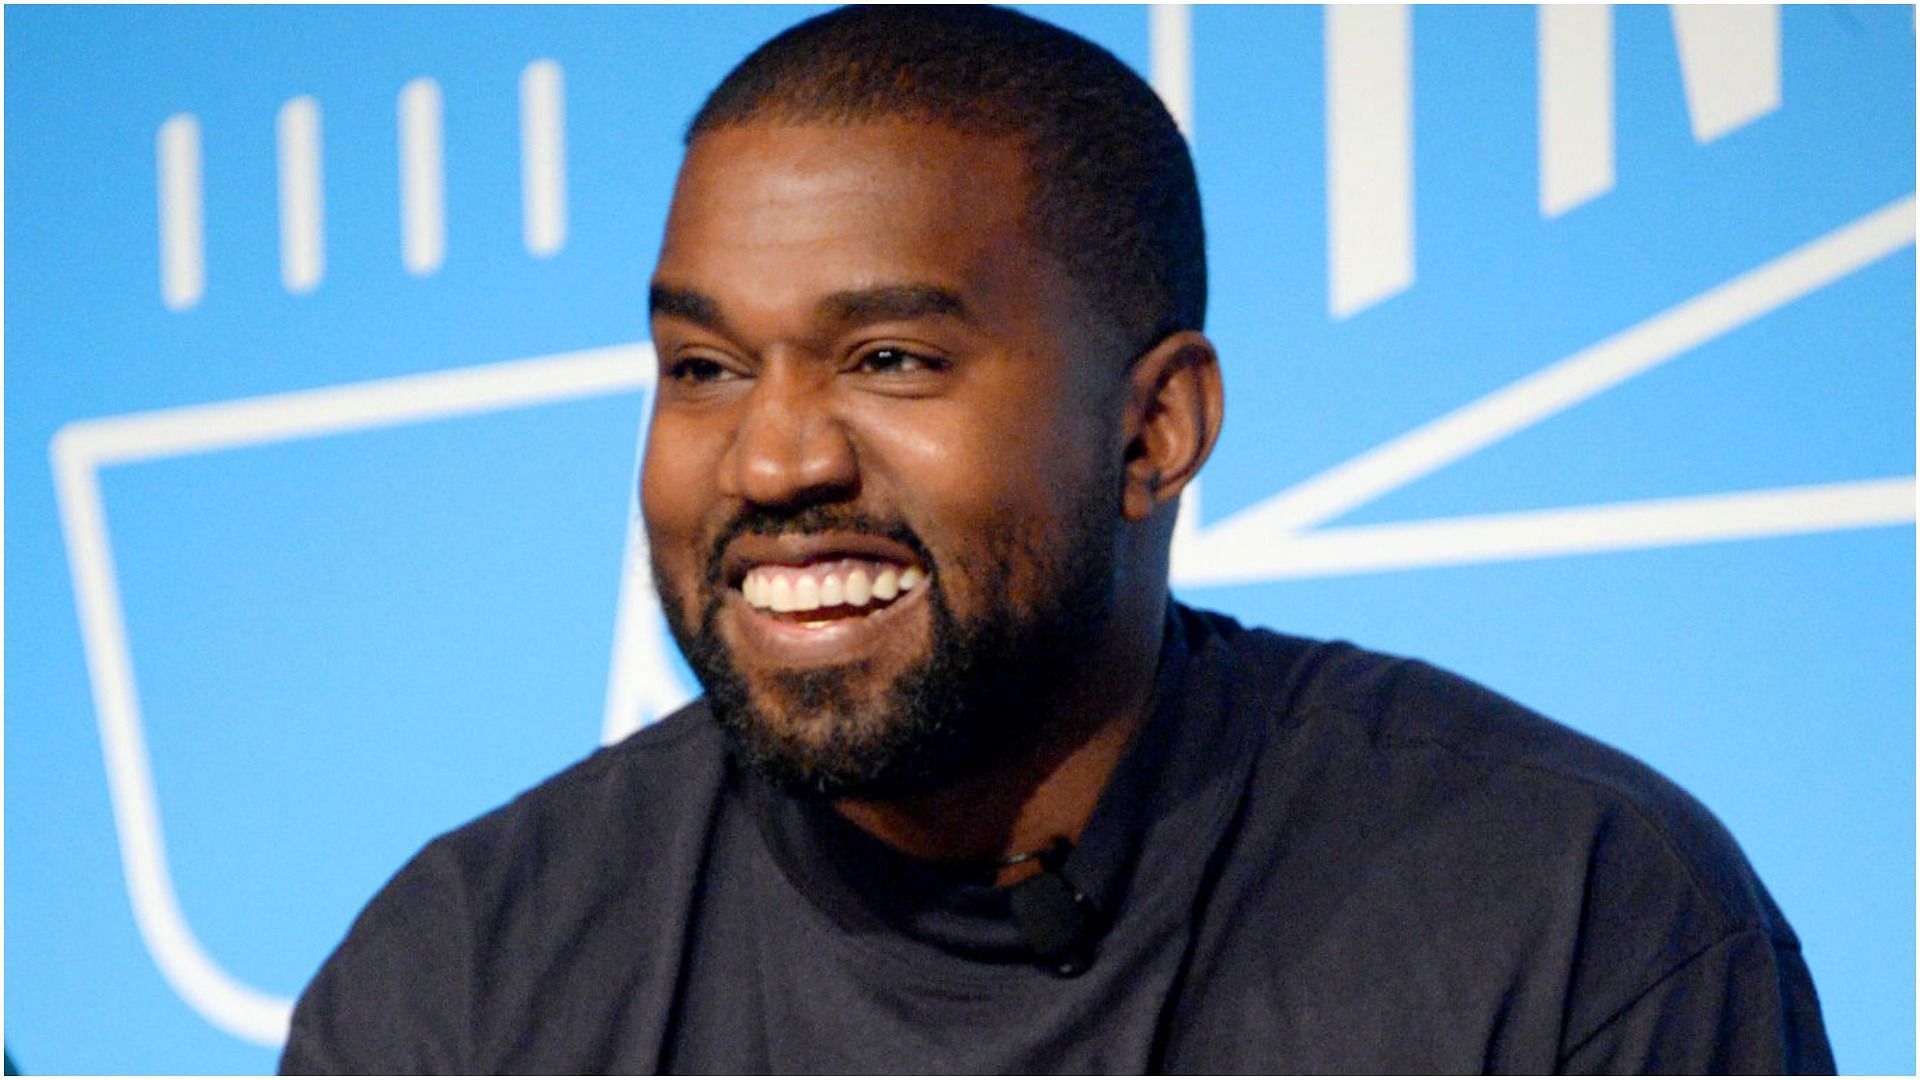 Kanye West hesitated to get the Covid-19 vaccine in 2020 (Image via Brad Barket/Getty Images)